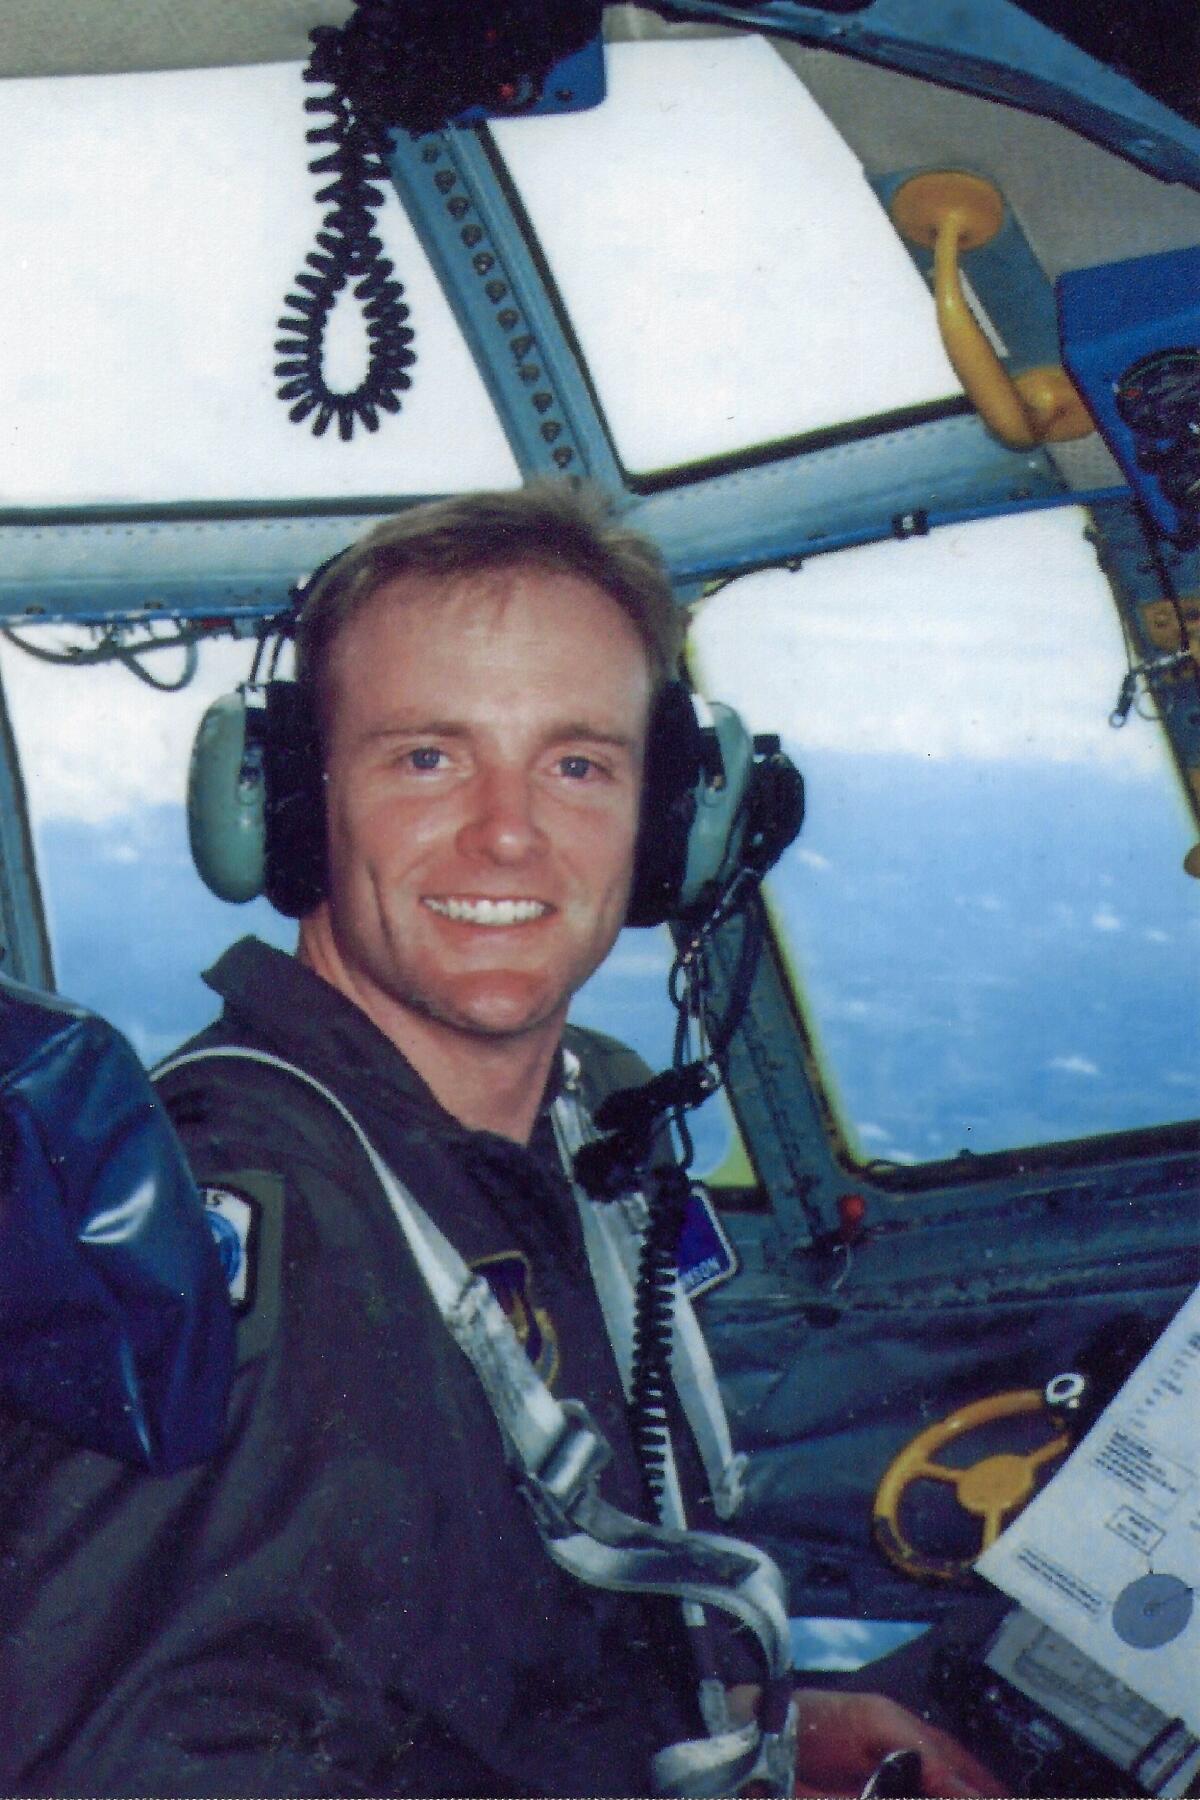 Johnson flies a C-130 military transport aircraft in an unspecified location over Europe sometime in 2000.